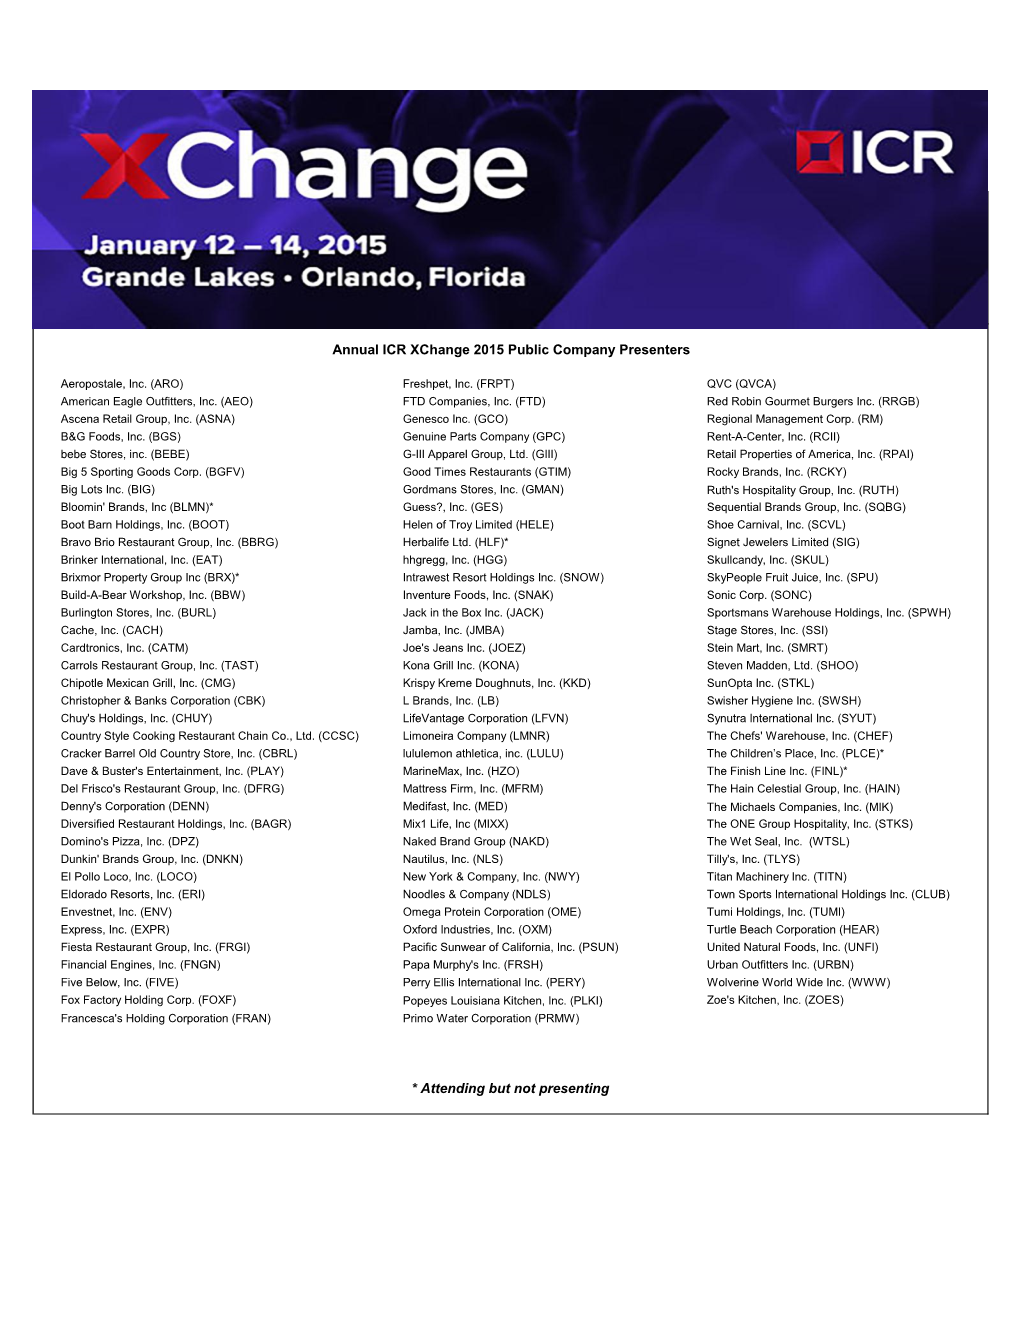 Annual ICR Xchange 2015 Public Company Presenters * Attending but Not Presenting